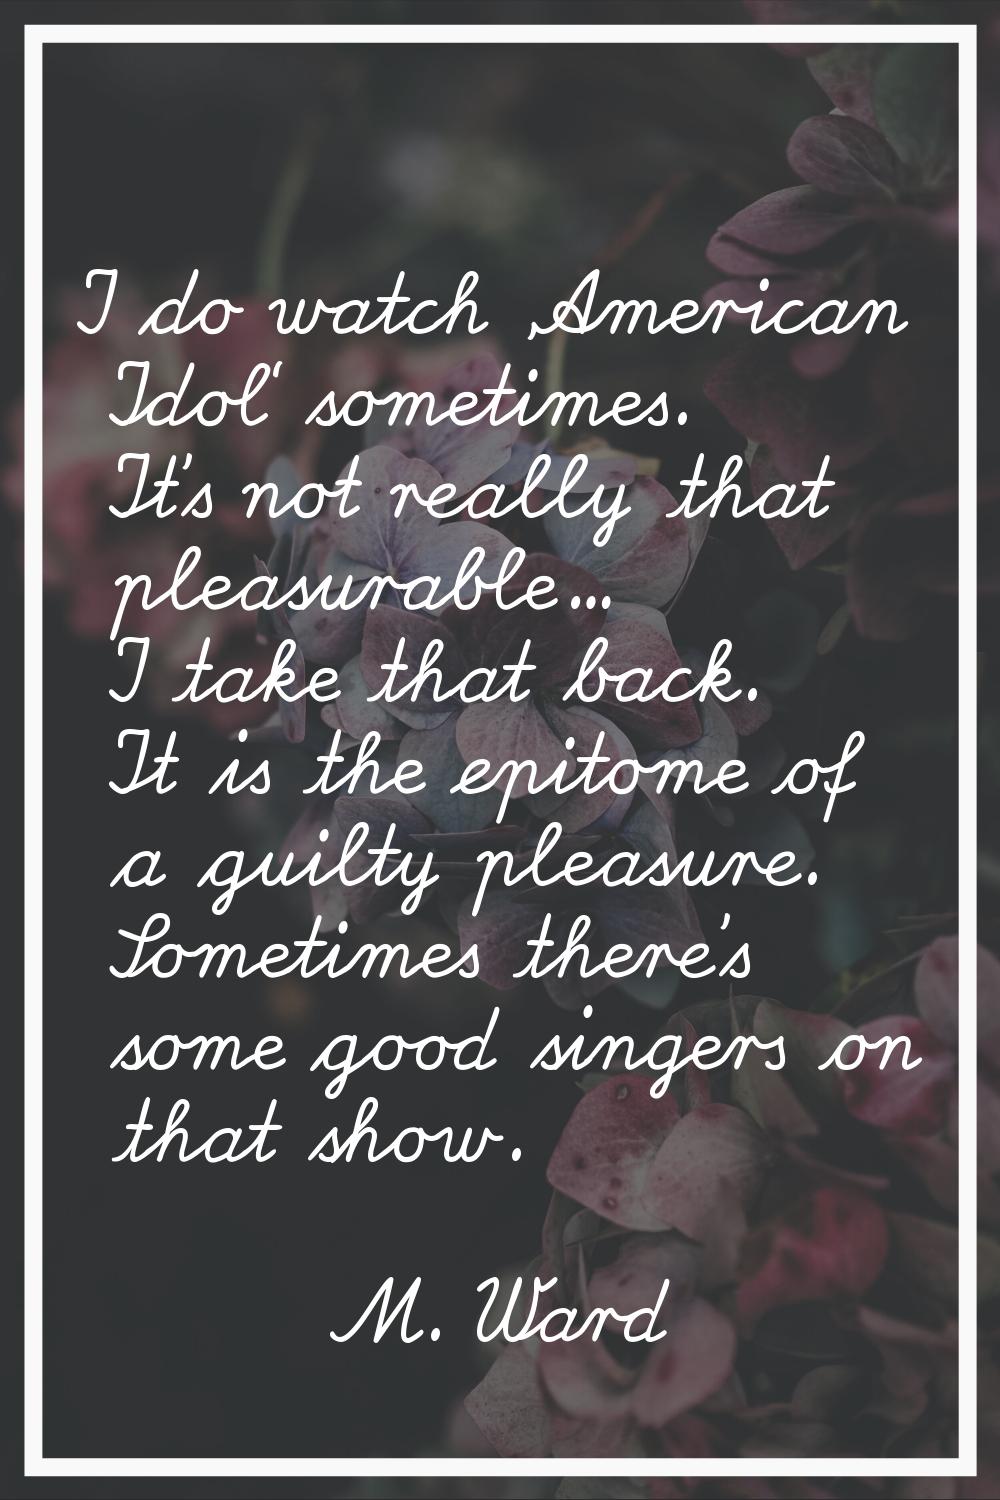 I do watch 'American Idol' sometimes. It's not really that pleasurable... I take that back. It is t